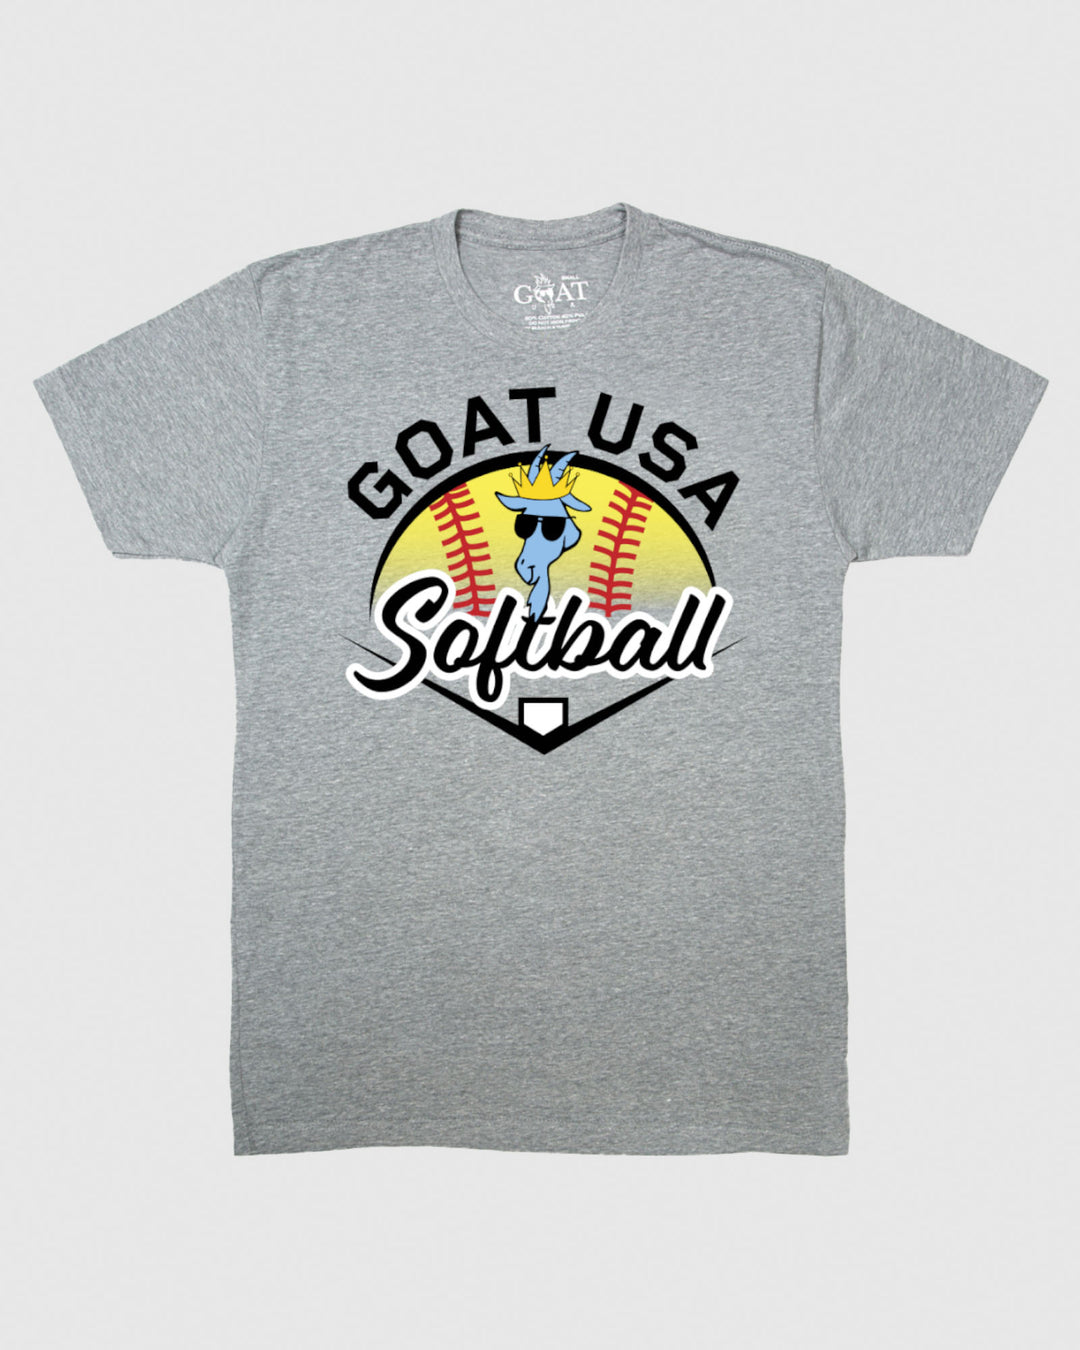 (Front)Gray t-shirt with GOAT USA Softball graphic